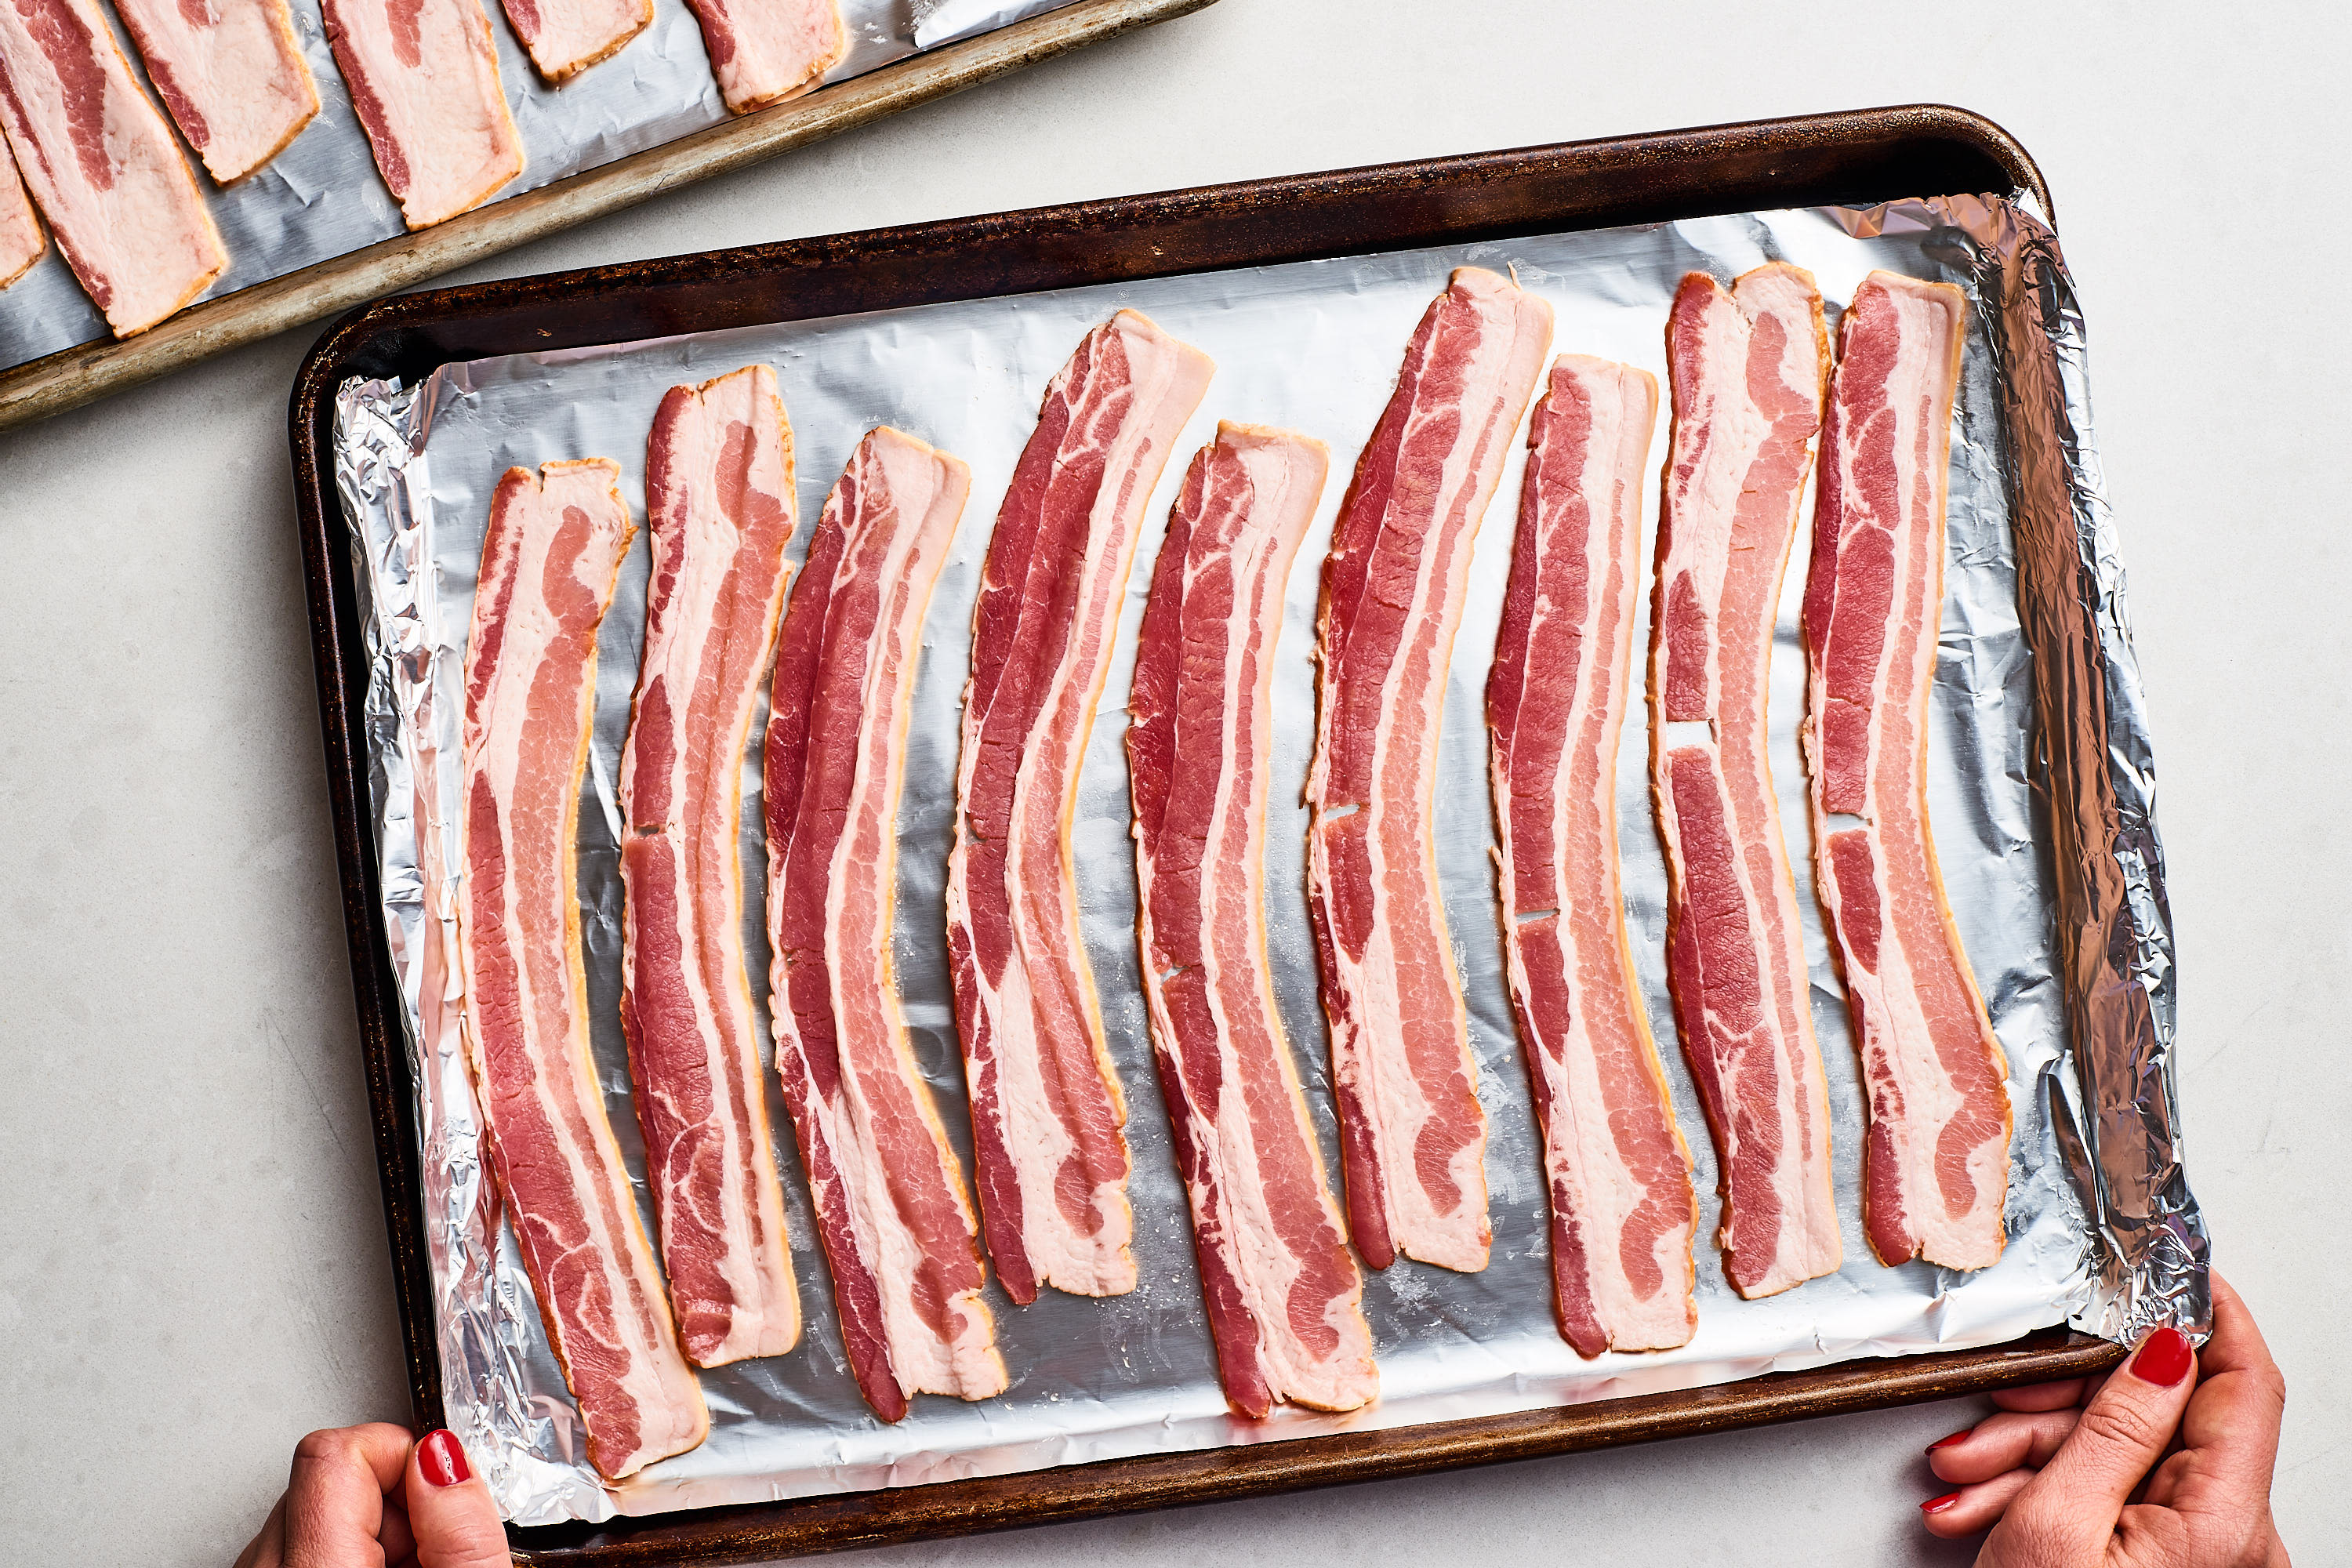 How to Make the Best Oven Baked Bacon - Tipps in the Kitch